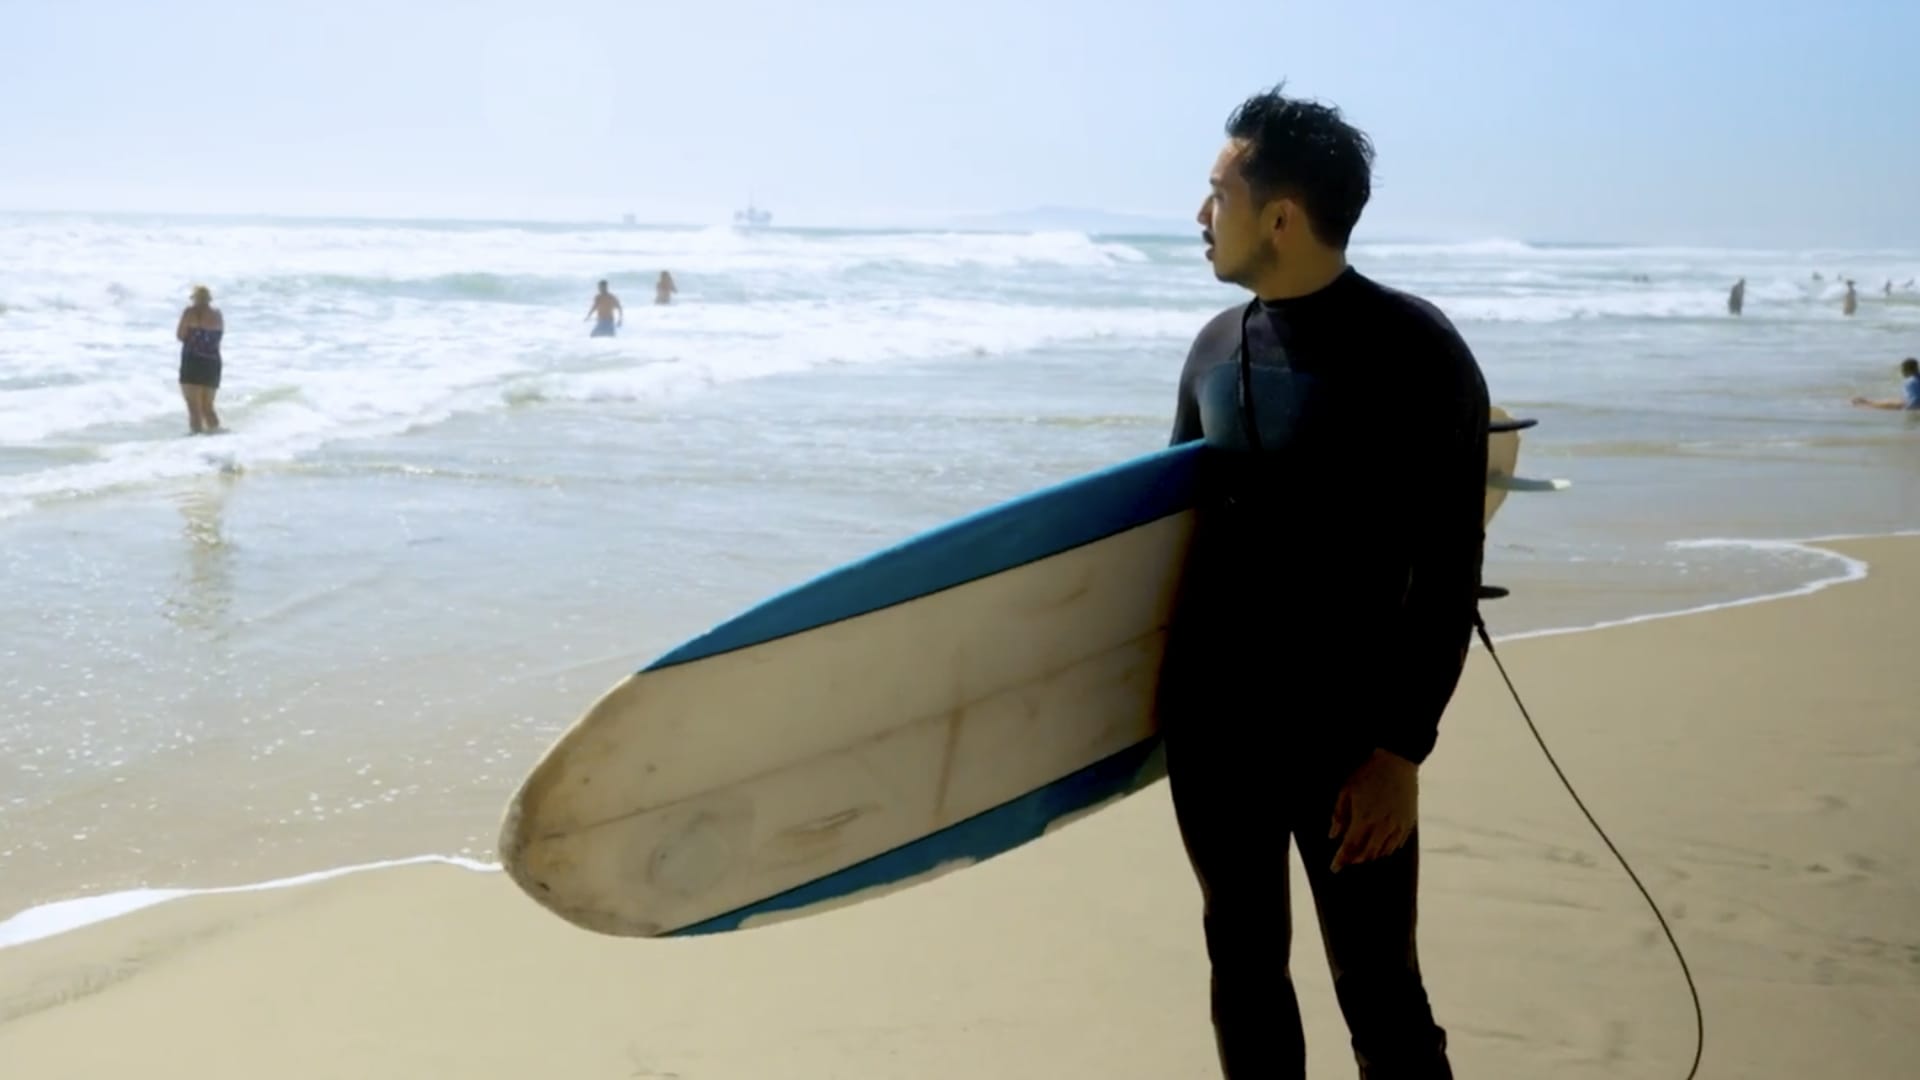 Moses Lin lives in Anaheim, California, and enjoys surfing at the beach.